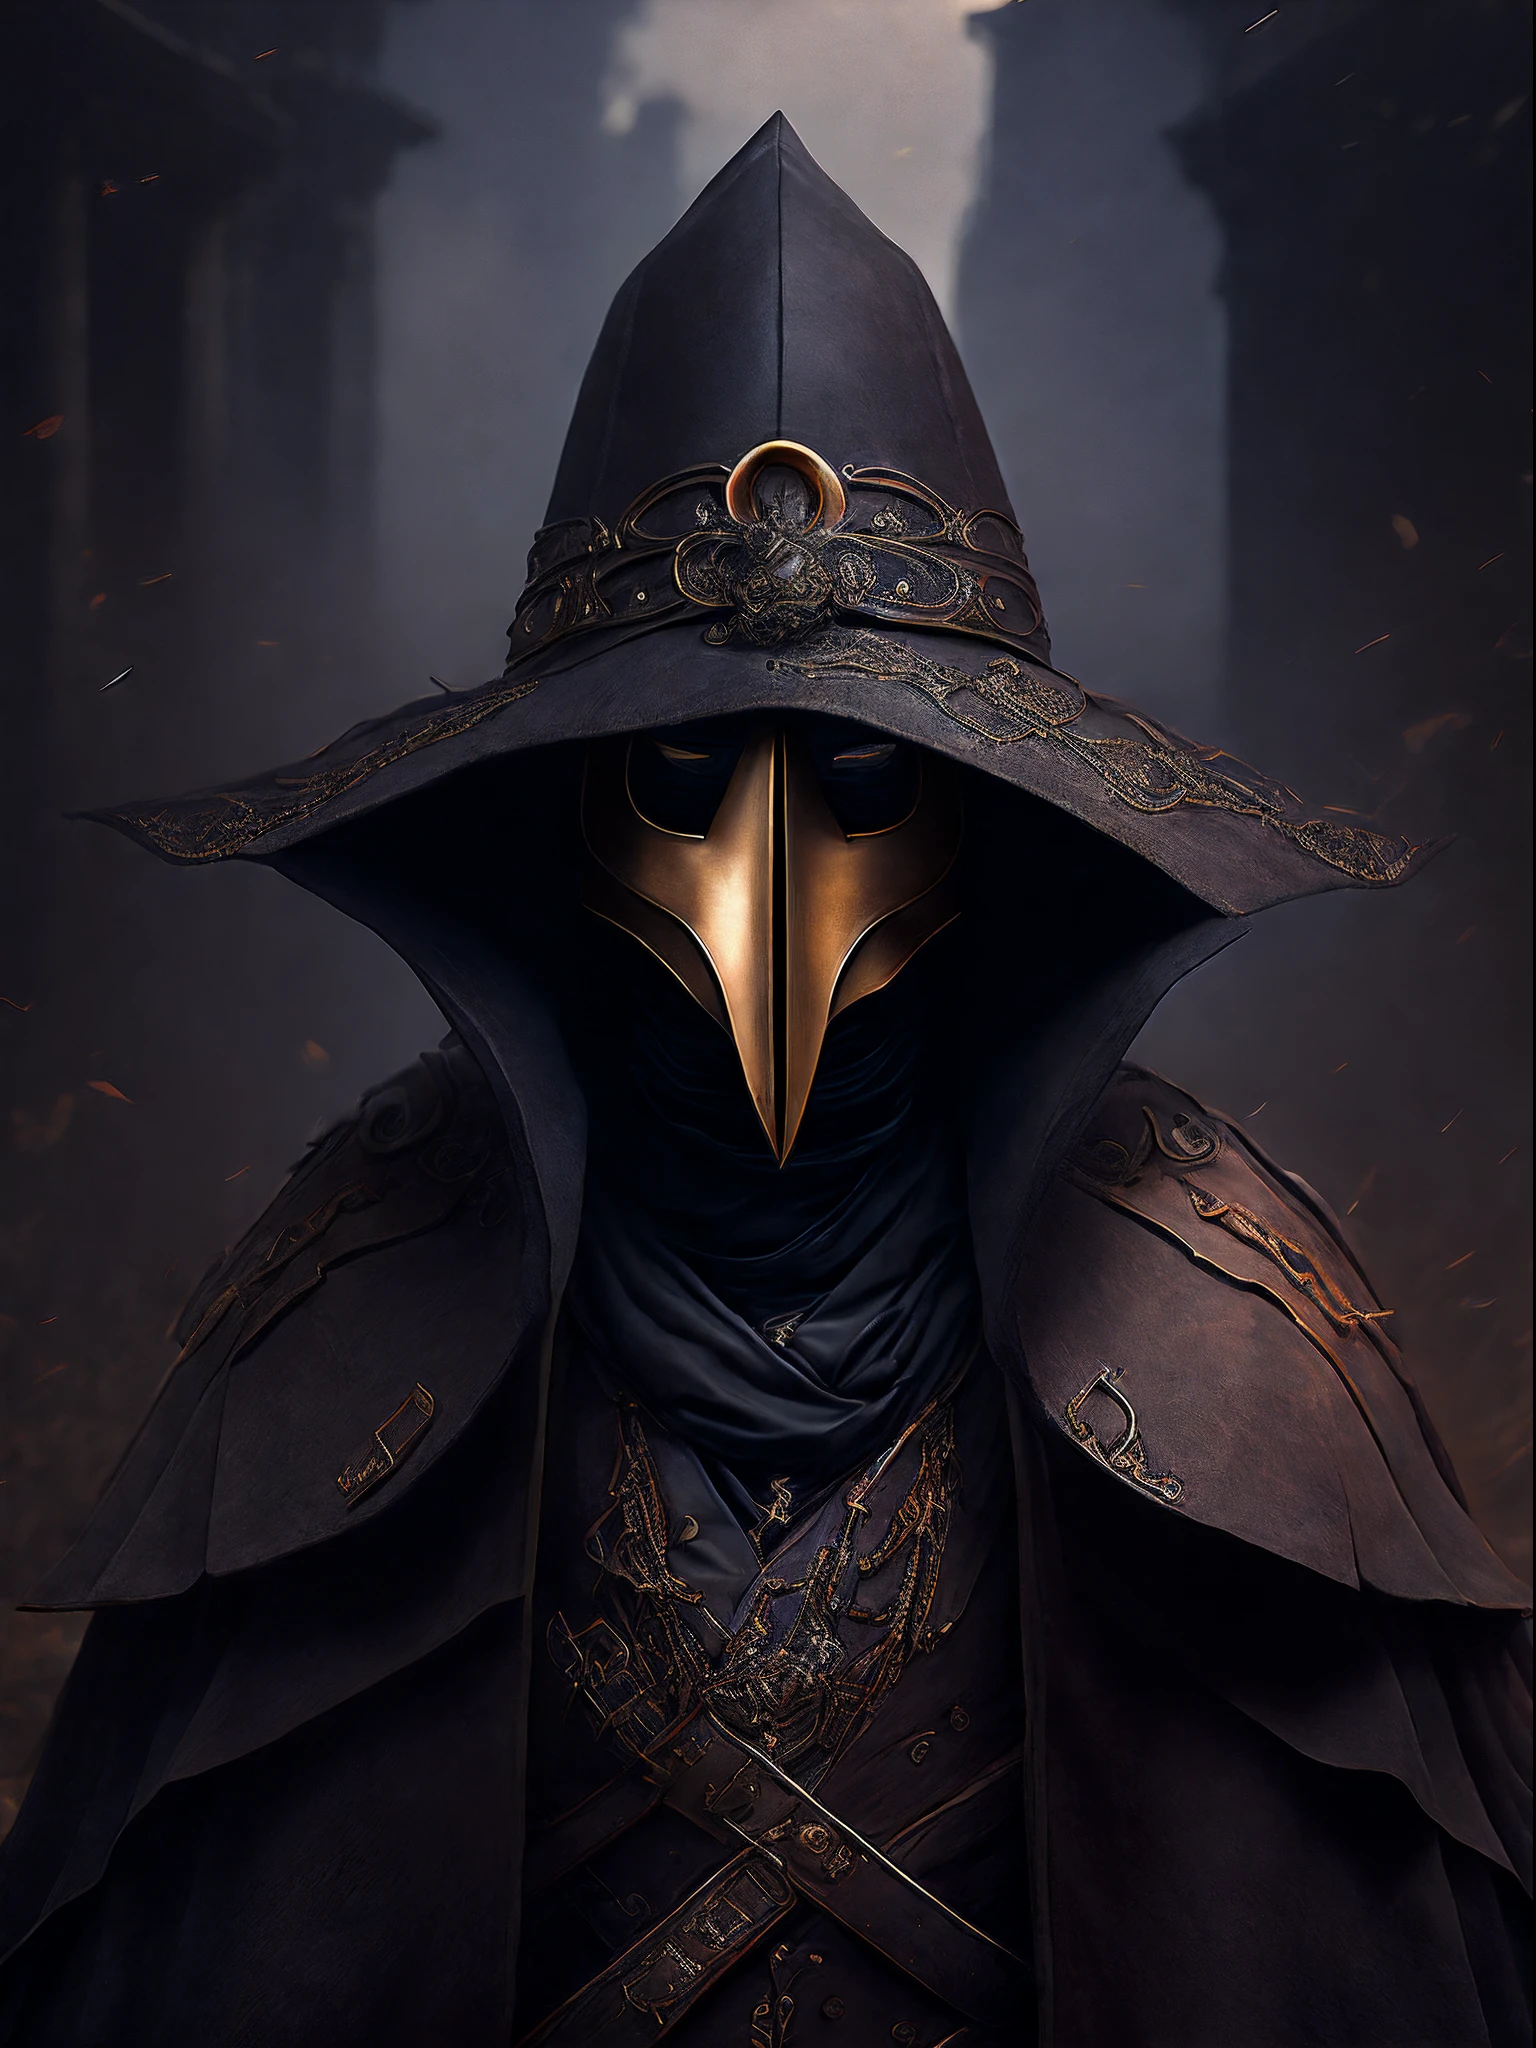 Beautiful, (masutepiece:1.2), (Best Quality:1.2), Realistic, Perfect eyes, Perfect face, Perfect Lighting, 1boy, plague doctor, hoods, Mask, Plague Doctor Mask, Faceless, cana, Evil atmosphere, skull belt,silk hat, chain, Black veil, trench coat, beaked mask, volume illumination:1.1, darkness, (detail: 1.2), cana, Floating particles, (depth of fields), High quality, Fujifilm 85mm, Ruins, landscape, highly detailed back ground, Nightmare, 8K, Convoluted, Grip, Mysterious,Black fog, Leather handbags